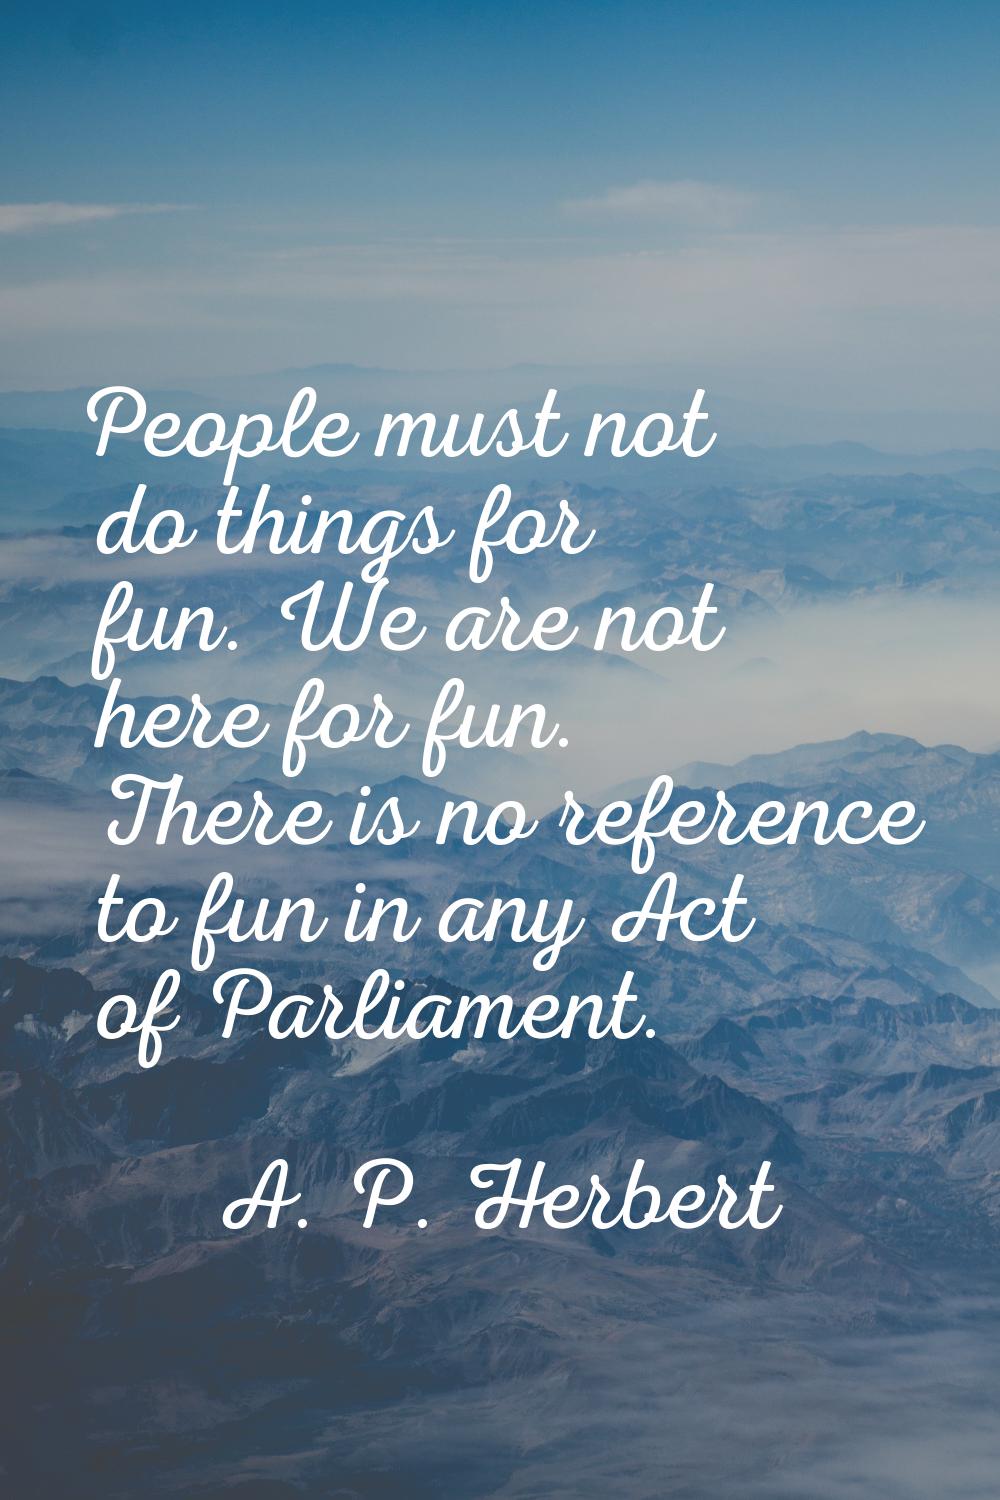 People must not do things for fun. We are not here for fun. There is no reference to fun in any Act